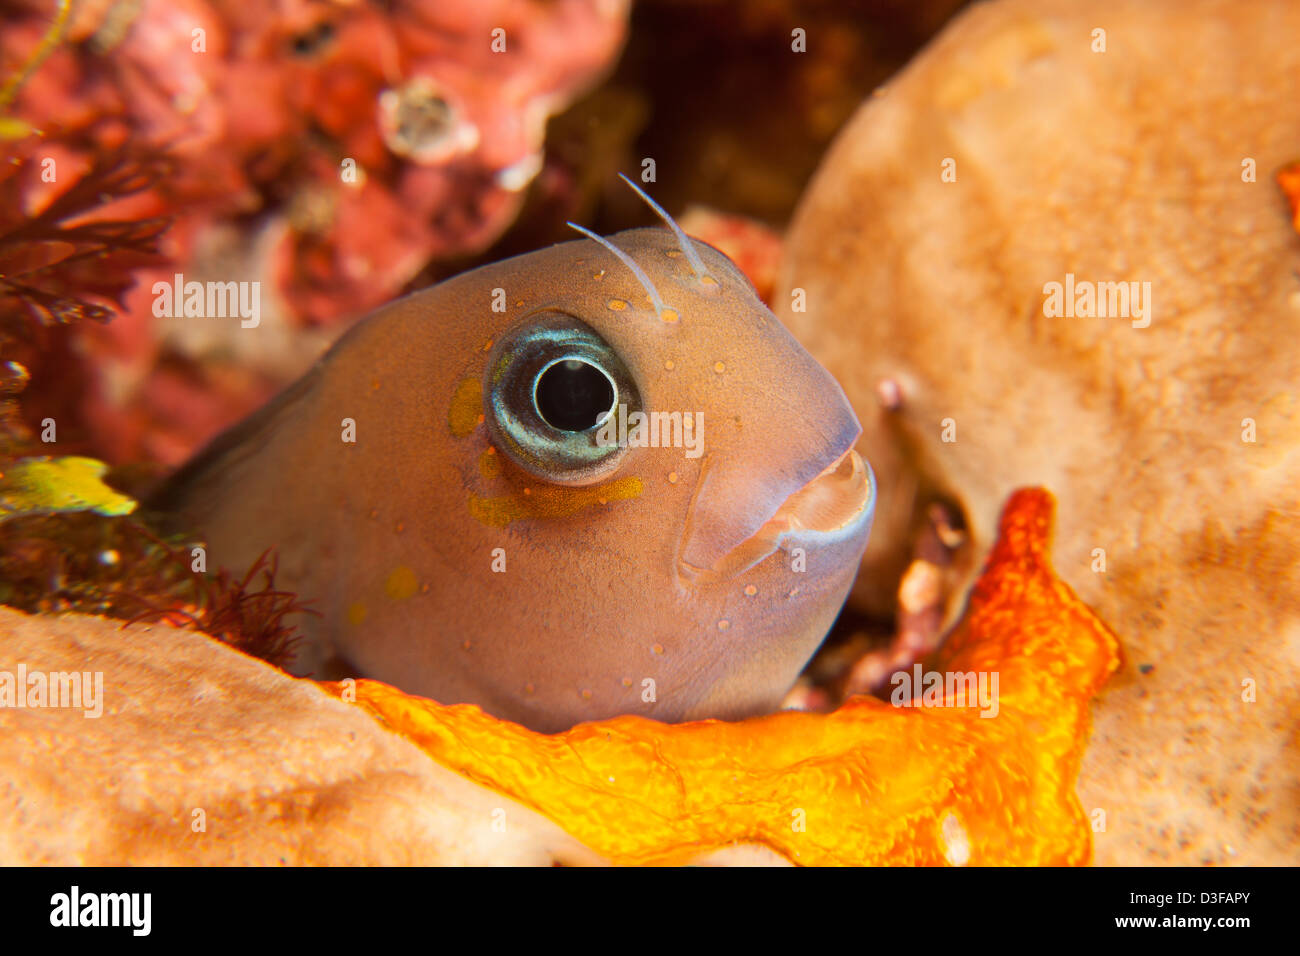 Bicolor Blenny (Ecsenius bicolor) peeking from hole in a tropical coral reef in Bali, Indonesia. Stock Photo